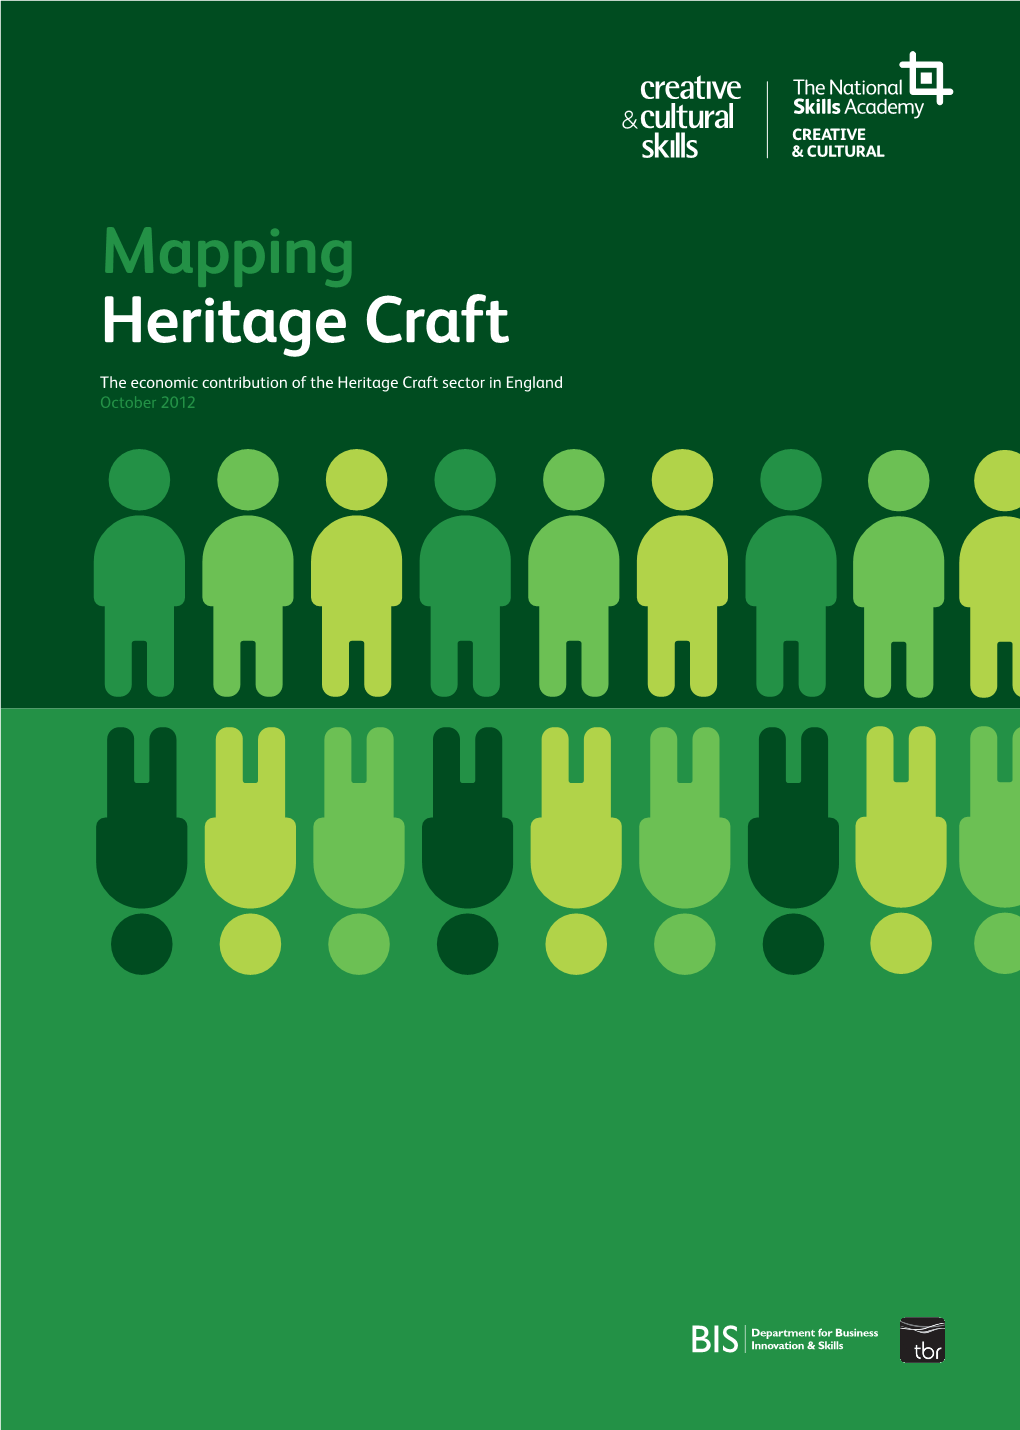 Mapping Heritage Craft